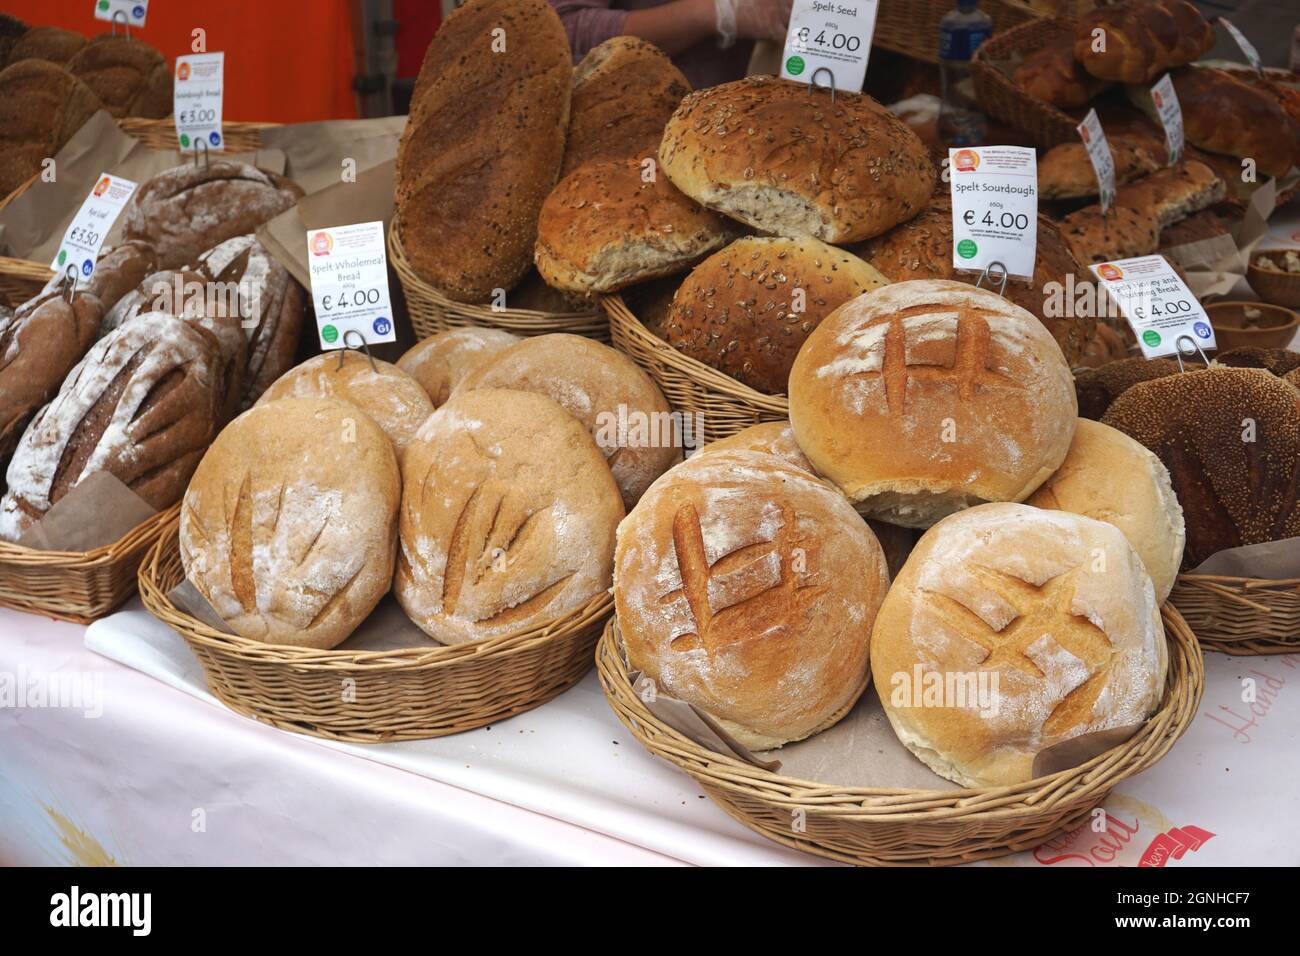 Plump loaves of wholesome artisan breads and other fresh baked goods offered for sale at an outdoor market in the seaside village of Howth, Ireland. Stock Photo